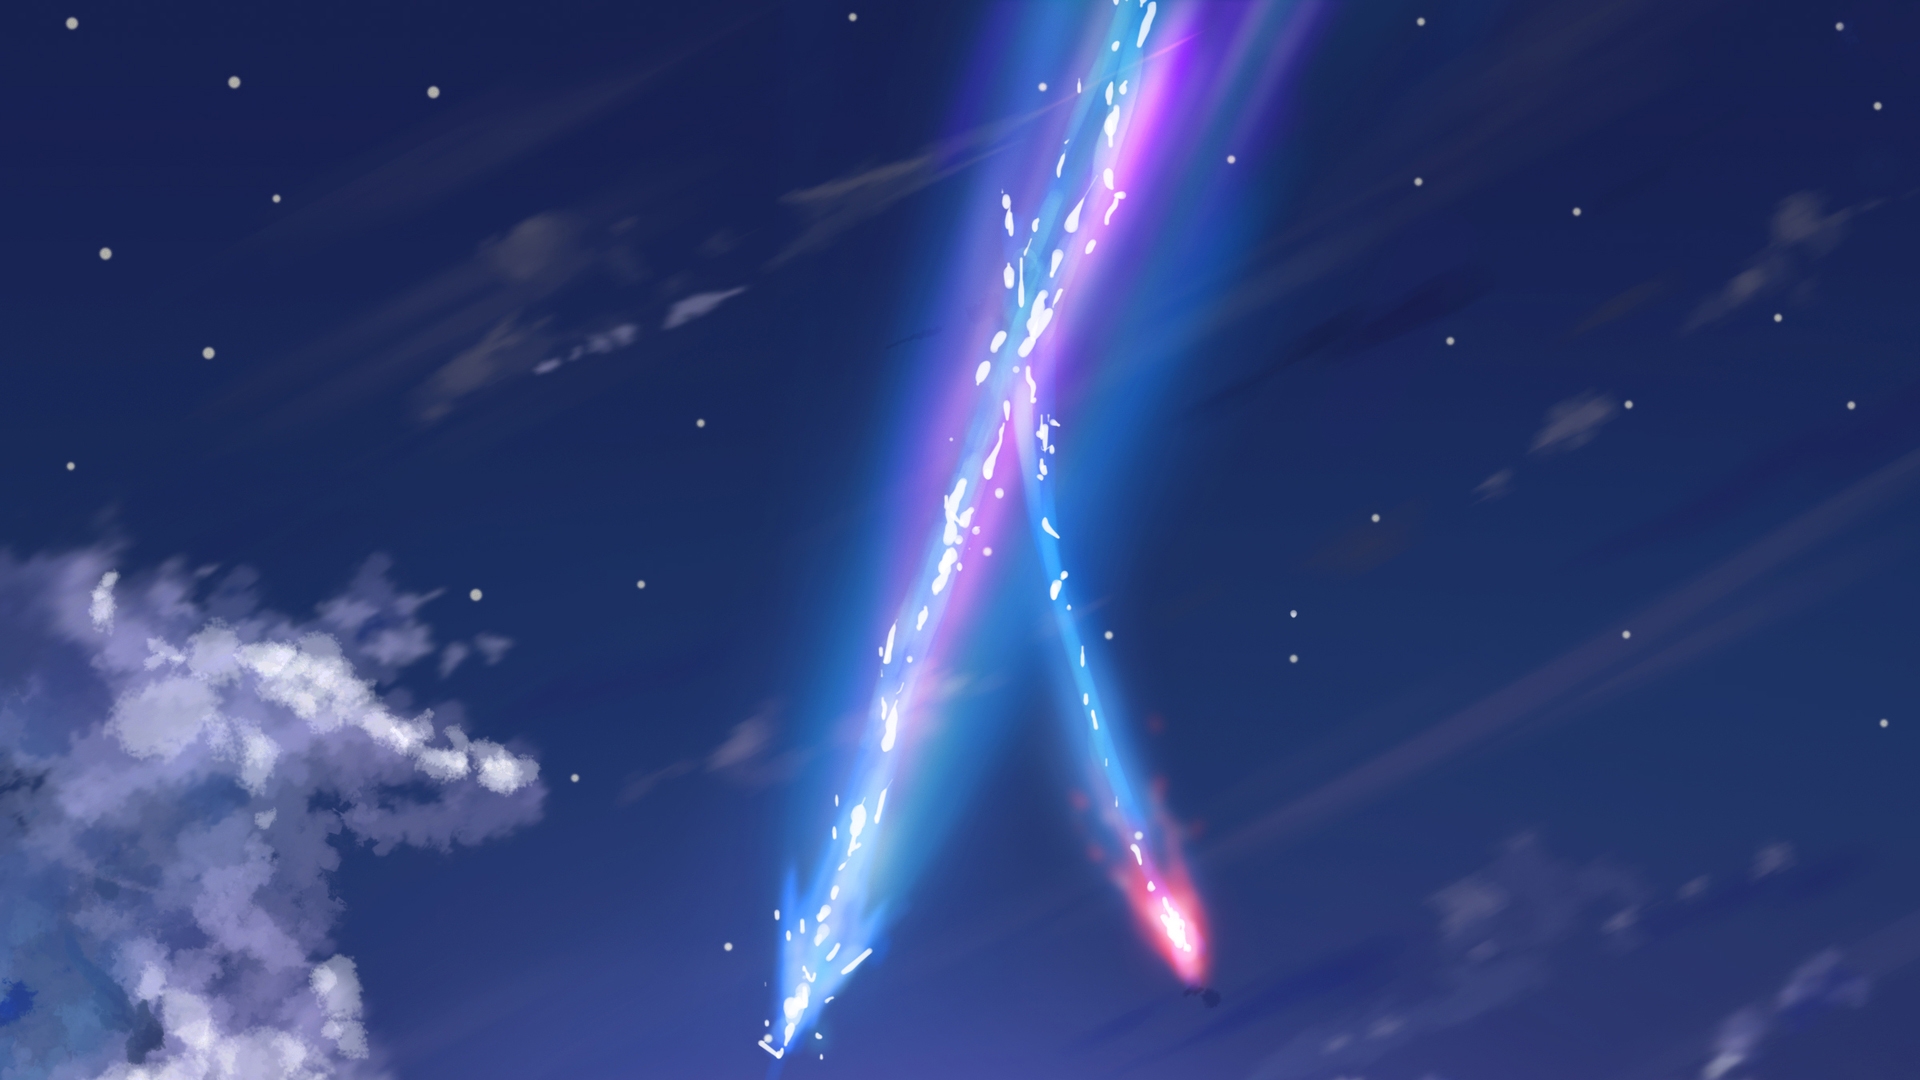 Download 1920x1080 Kimi No Na Wa, Sky, Clouds, Your Name Wallpaper for Widescreen